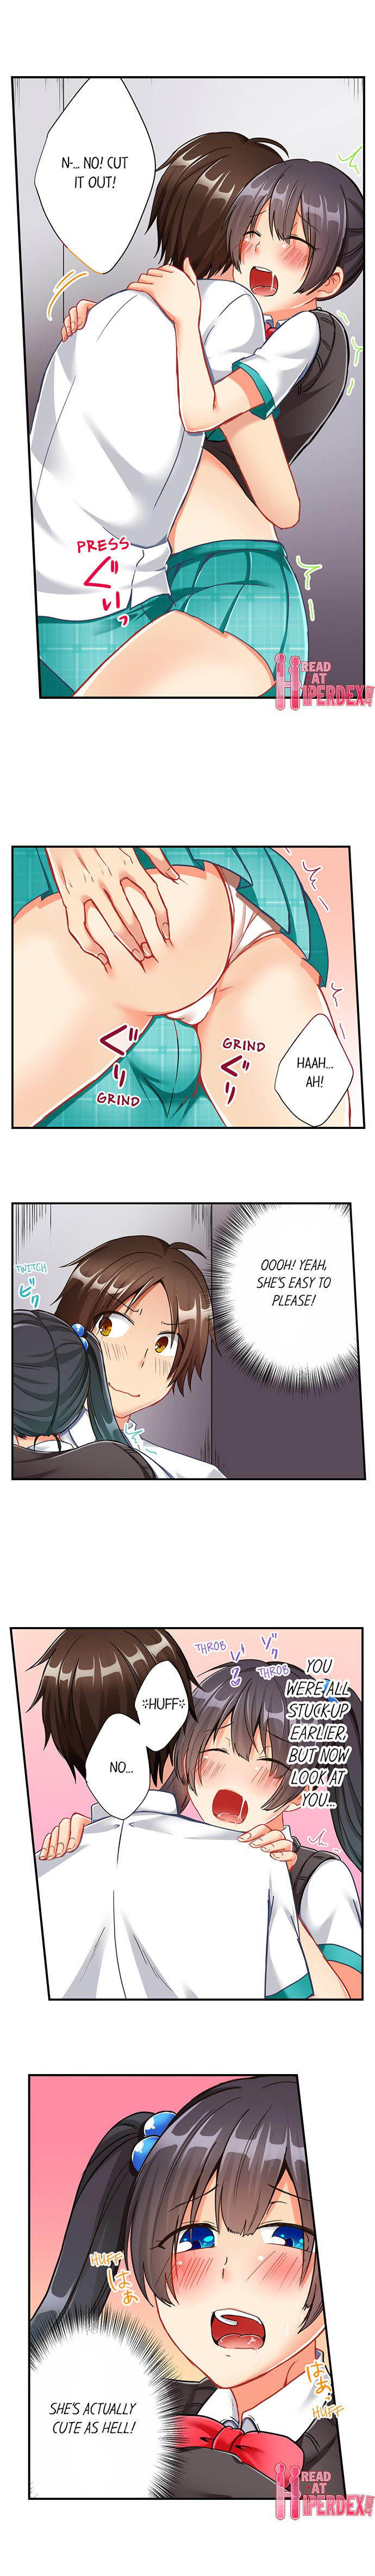 80% of the Swimming Club Girls Are Shaved - Chapter 6 Page 5